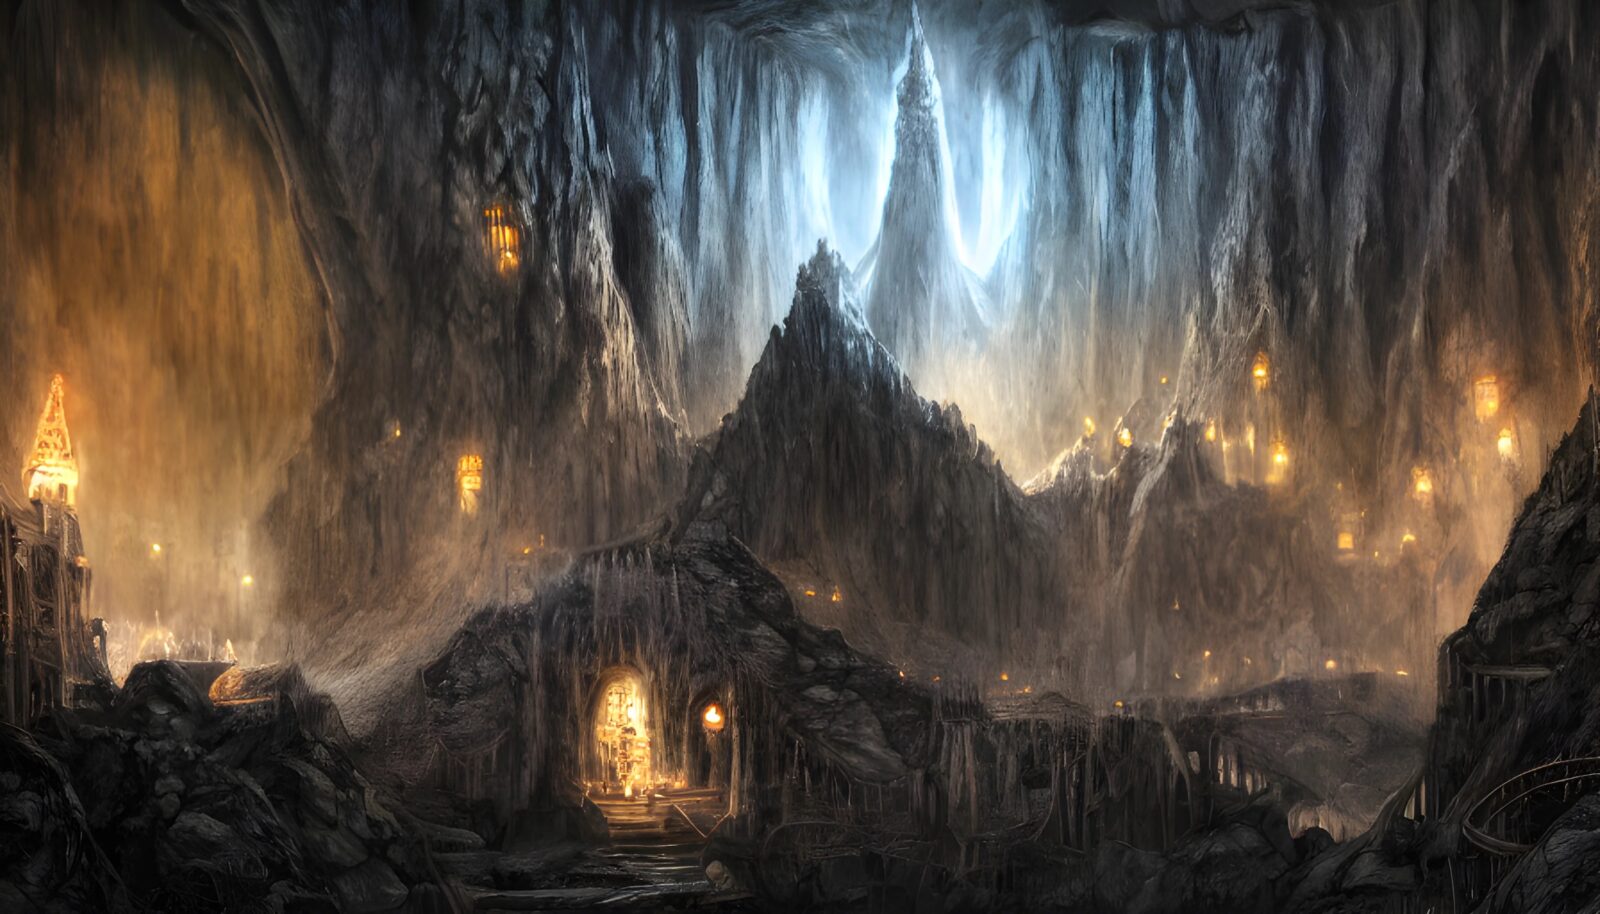 The Mines of Moria (The Lord of the Rings)